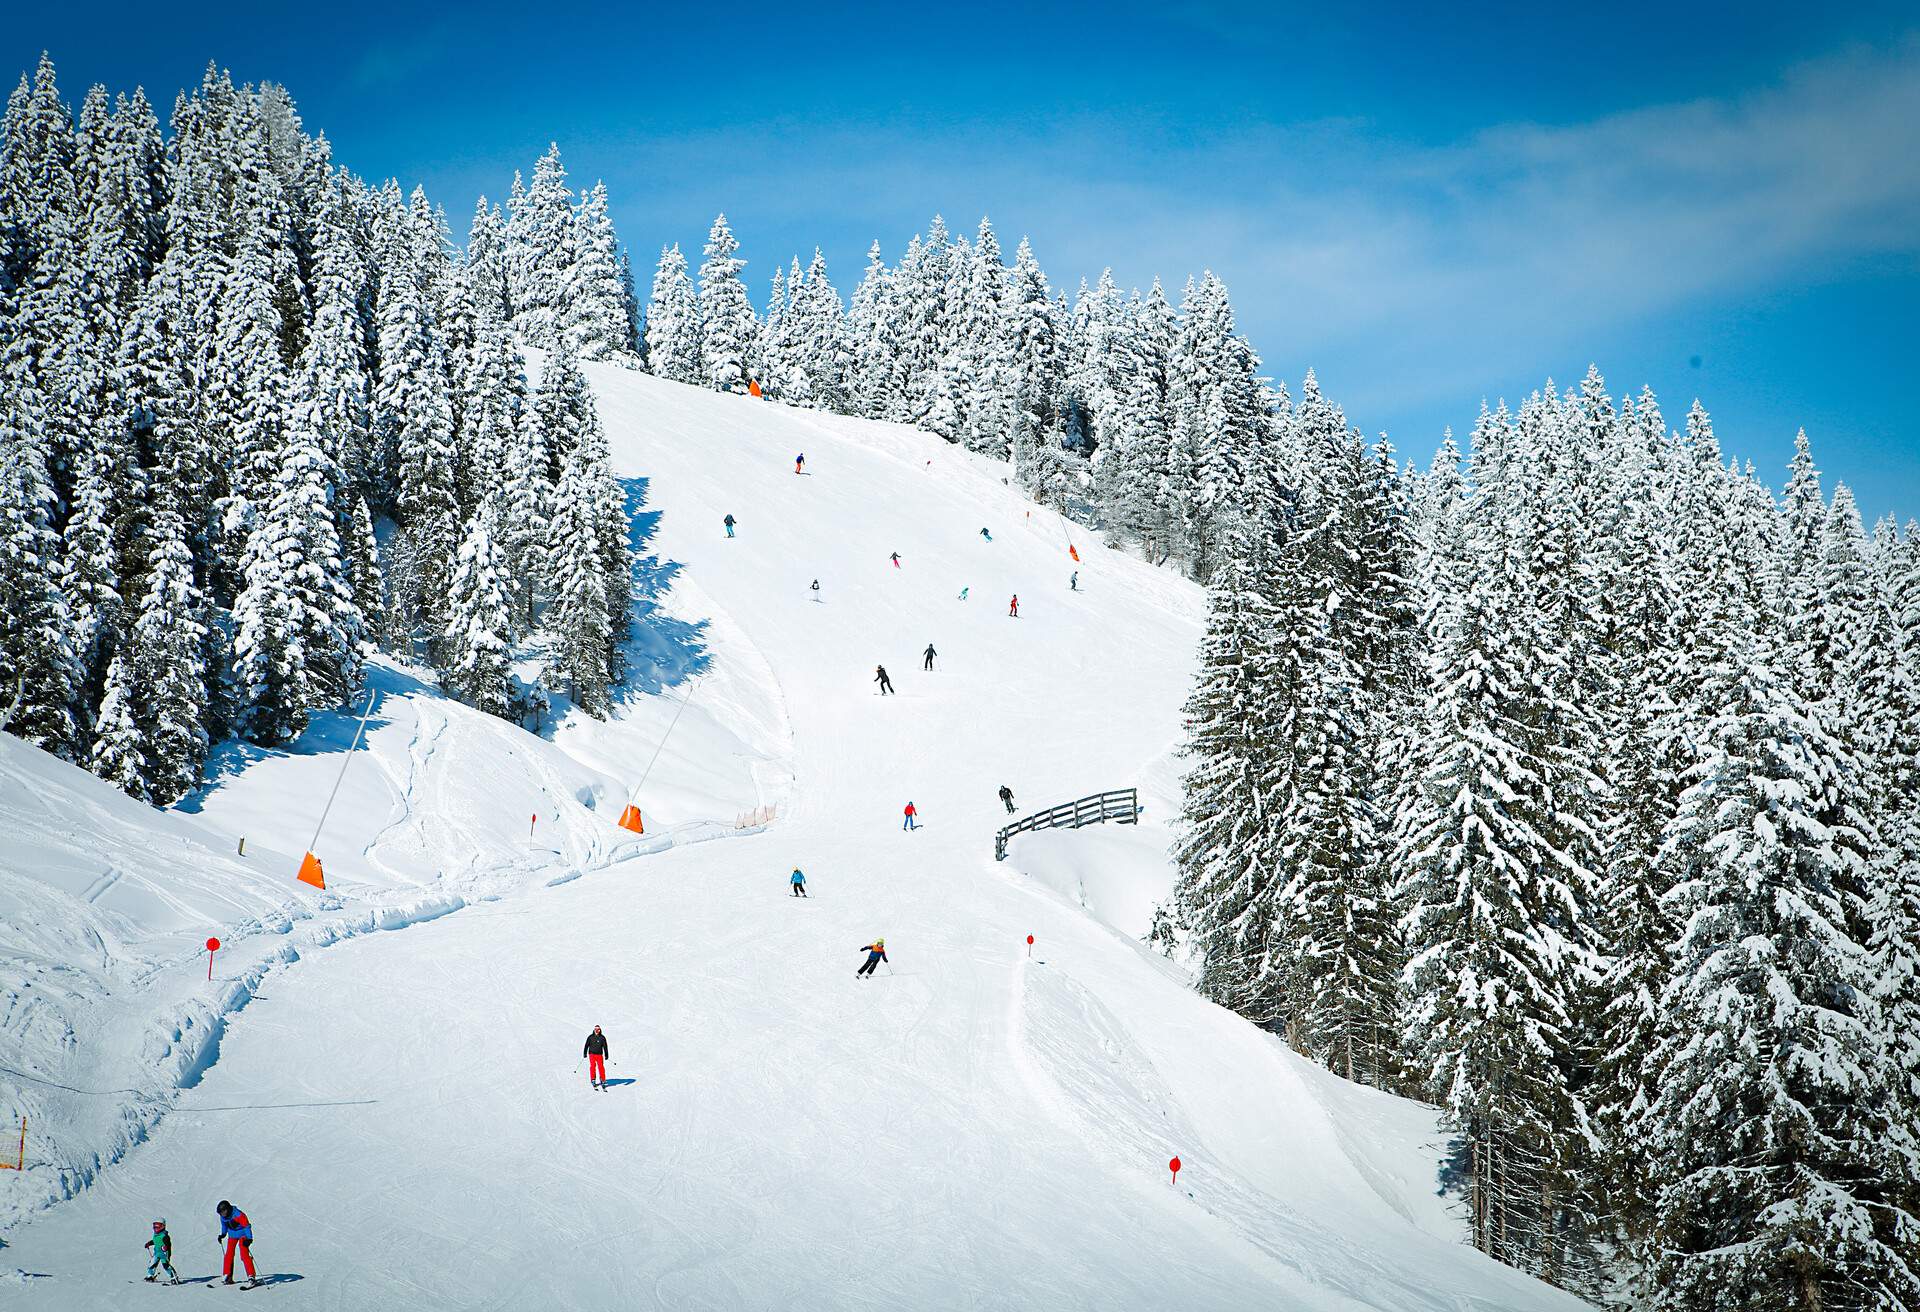 Ski slopes bordered by tall trees and populated with skiers.